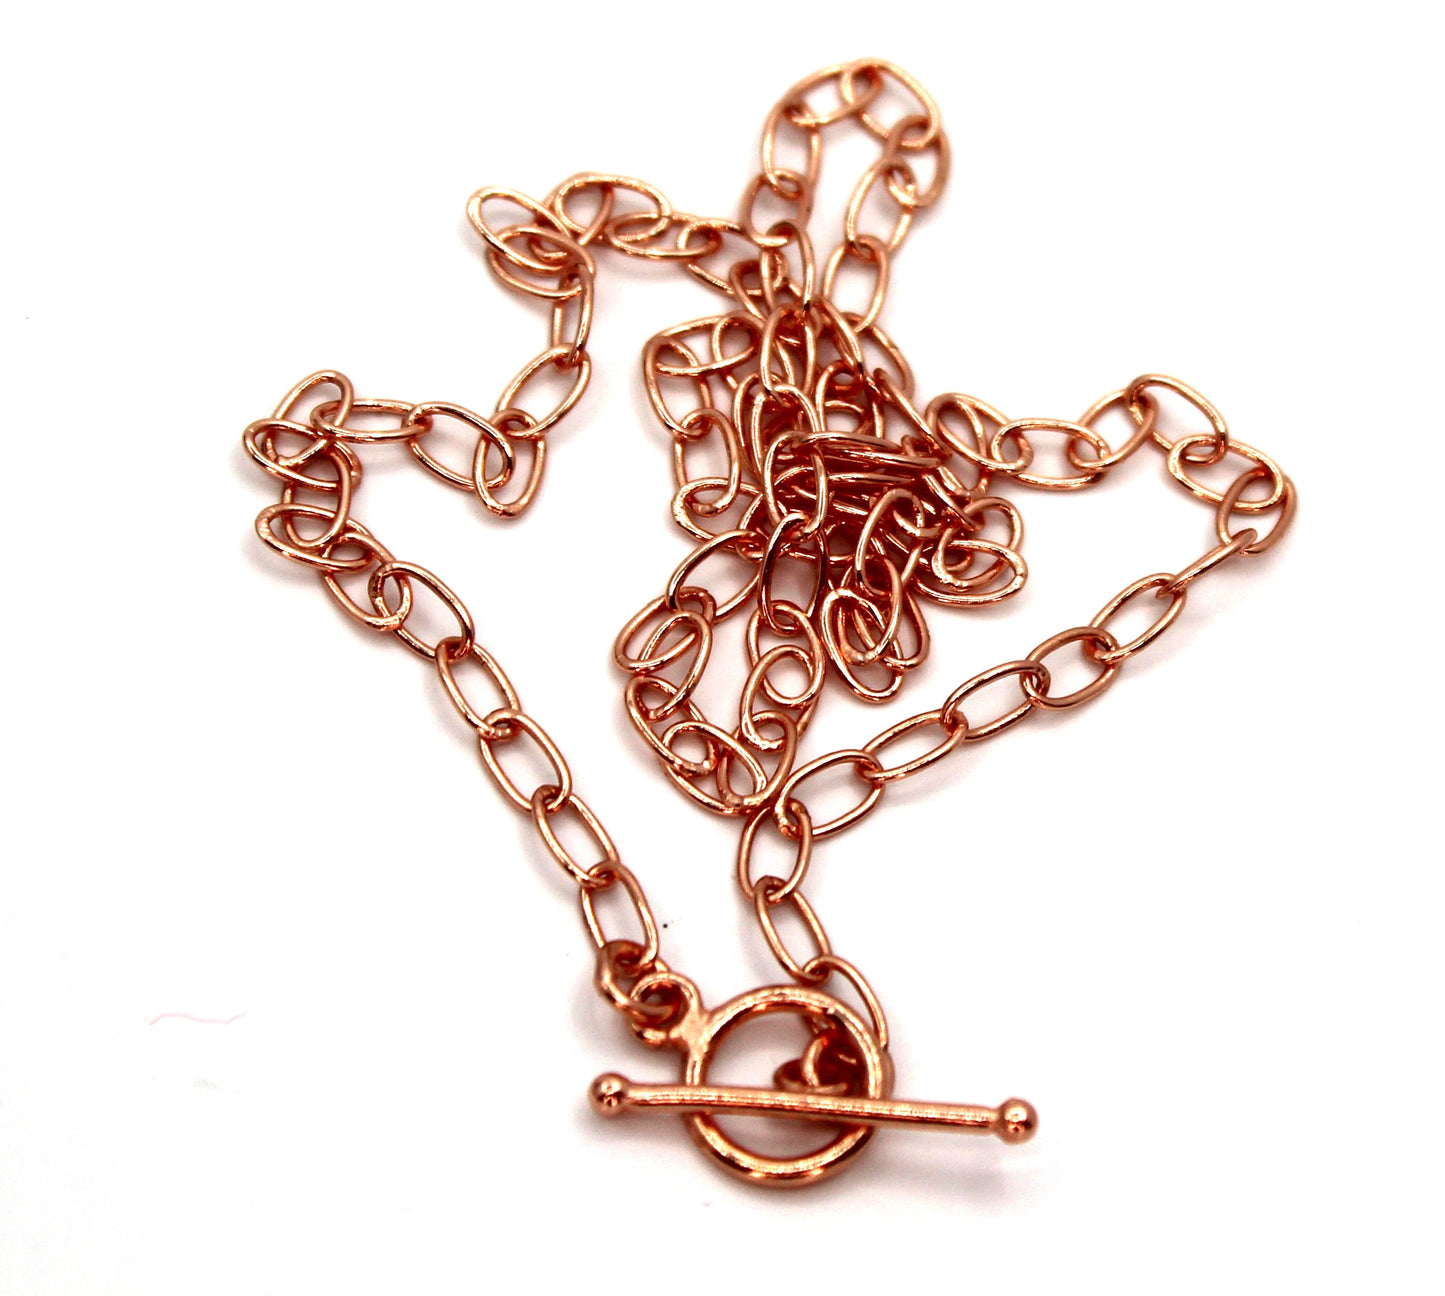 Create Your Own Oval Link Charm Necklace